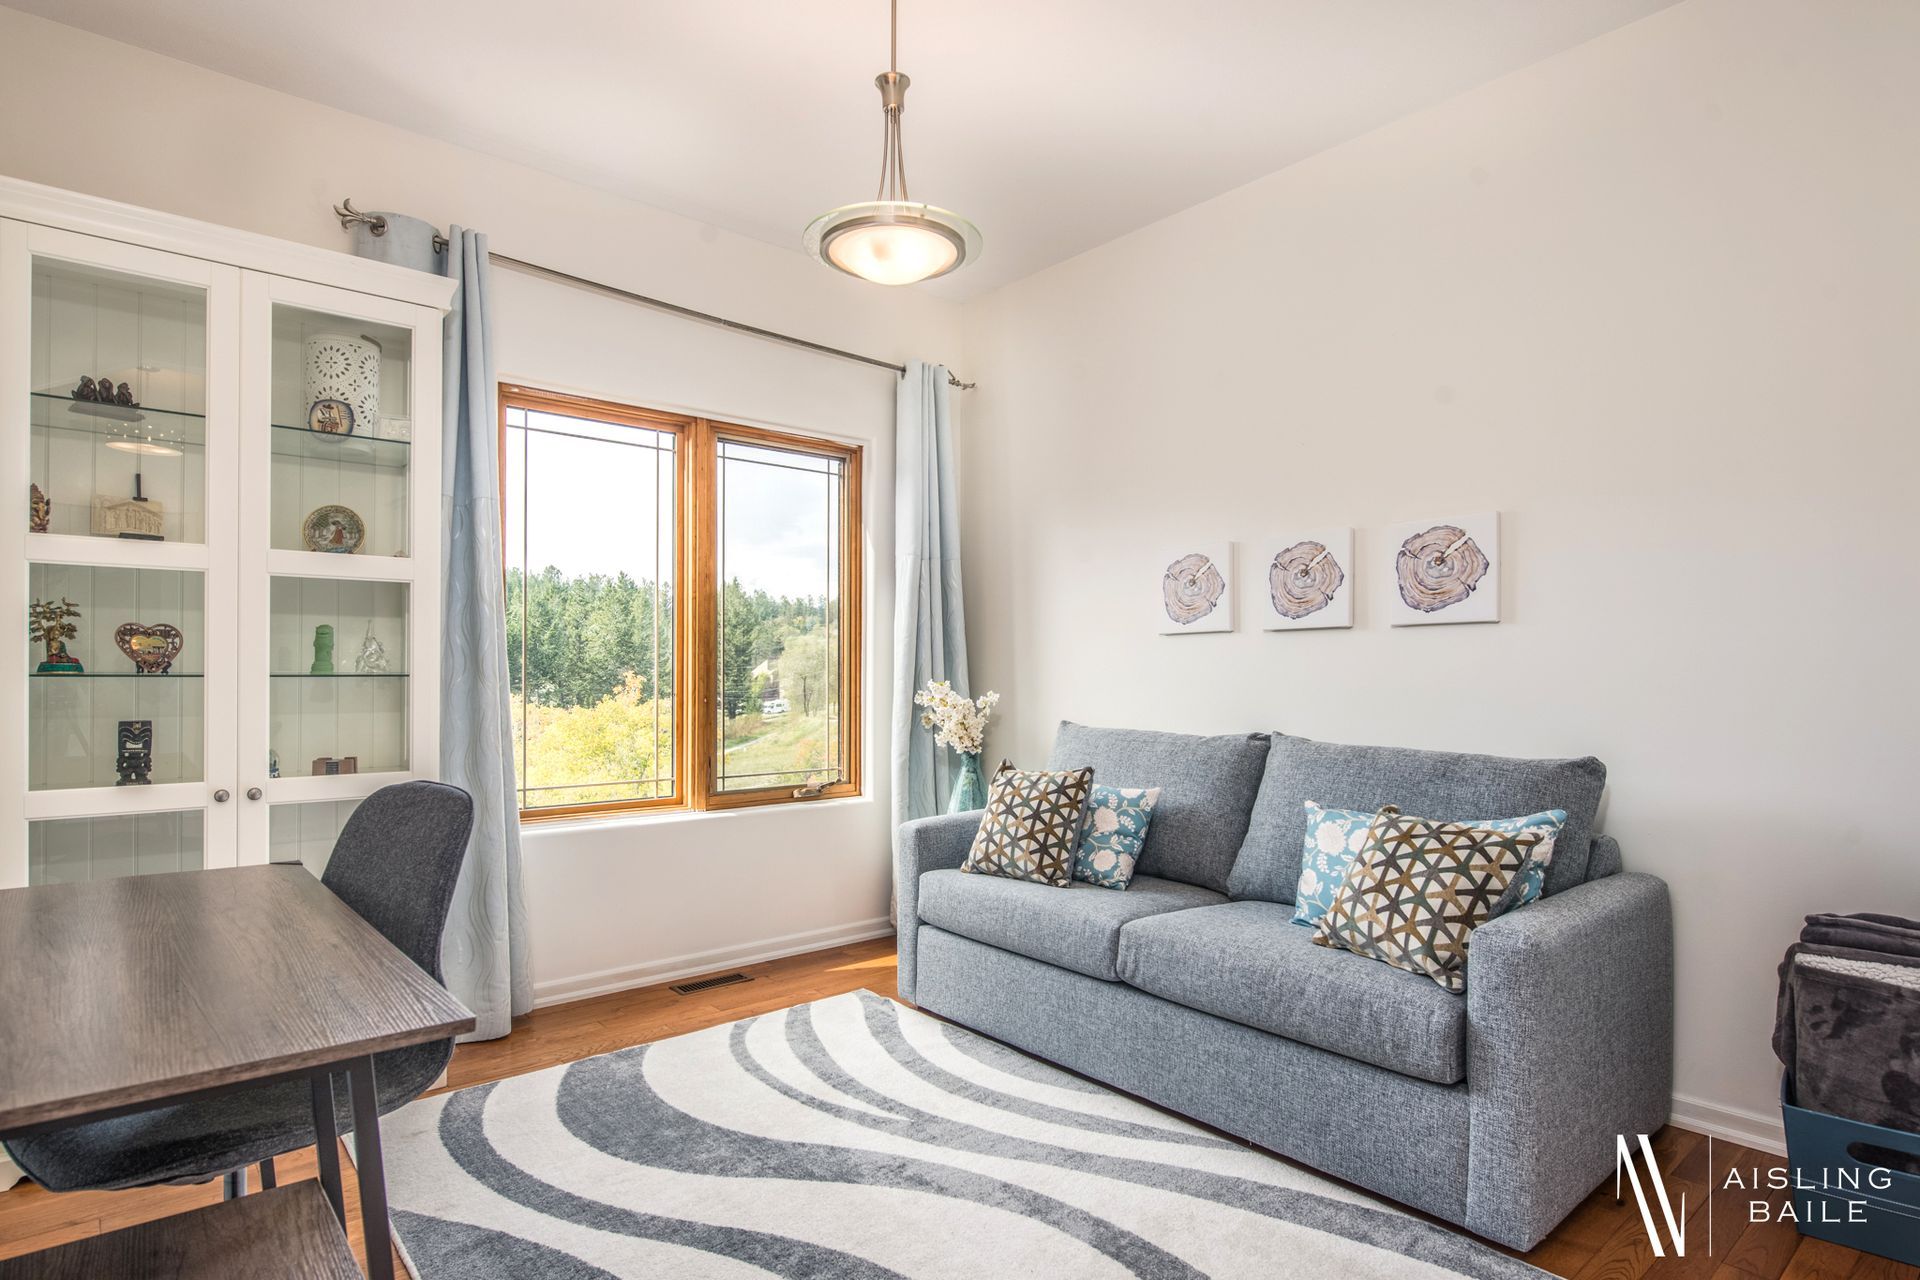 Den and office space of the Central Elegance, an Invermere BC Vacation Rental hosted by Aisling Baile Property Management.